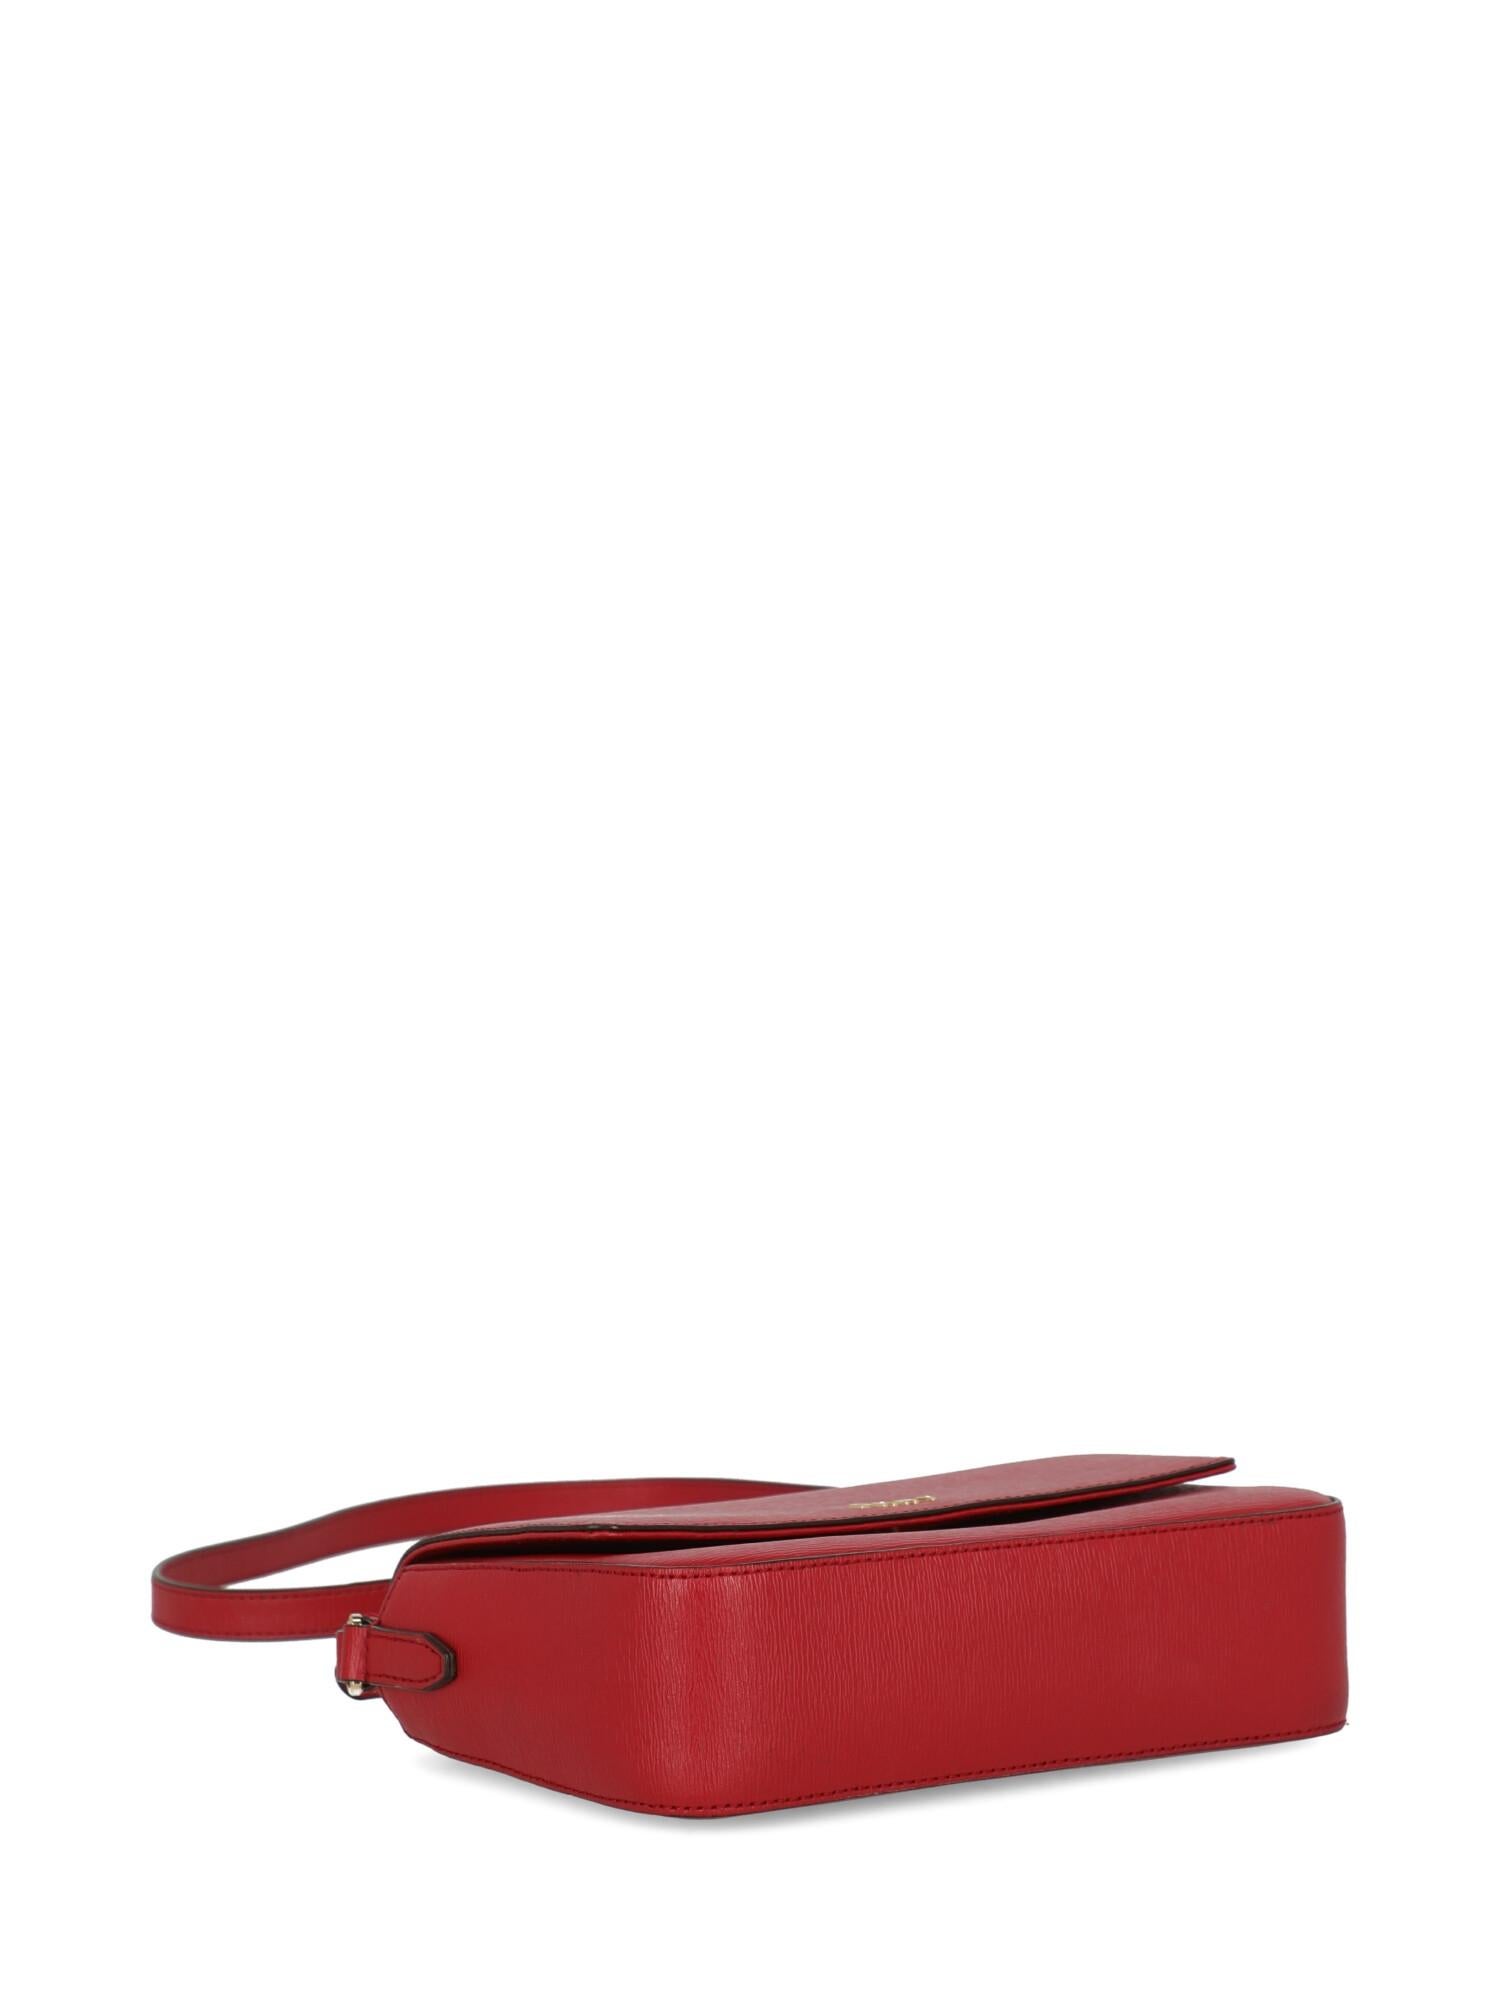 dkny red leather bag